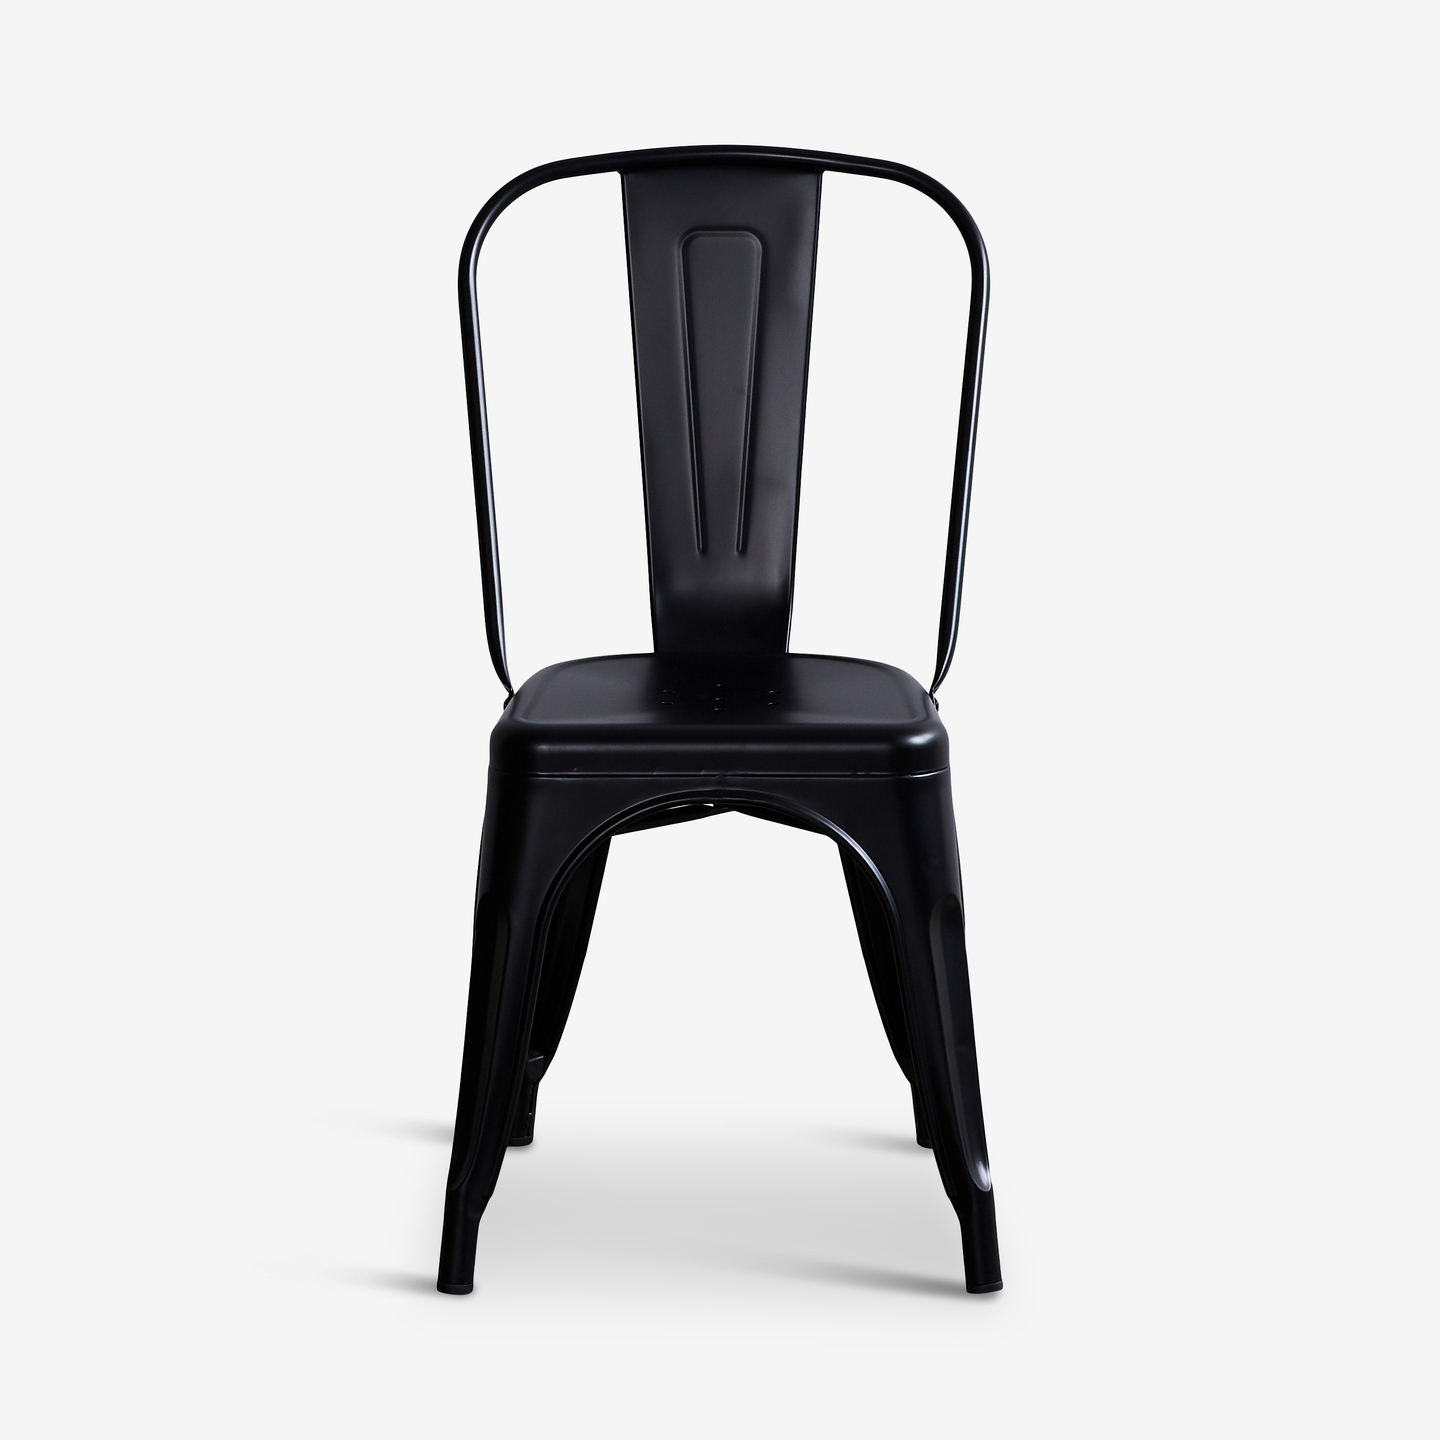 413_Trattoria-Side-Chair-Black_Flat-Front_Industrial_Dining-Room-16 2020